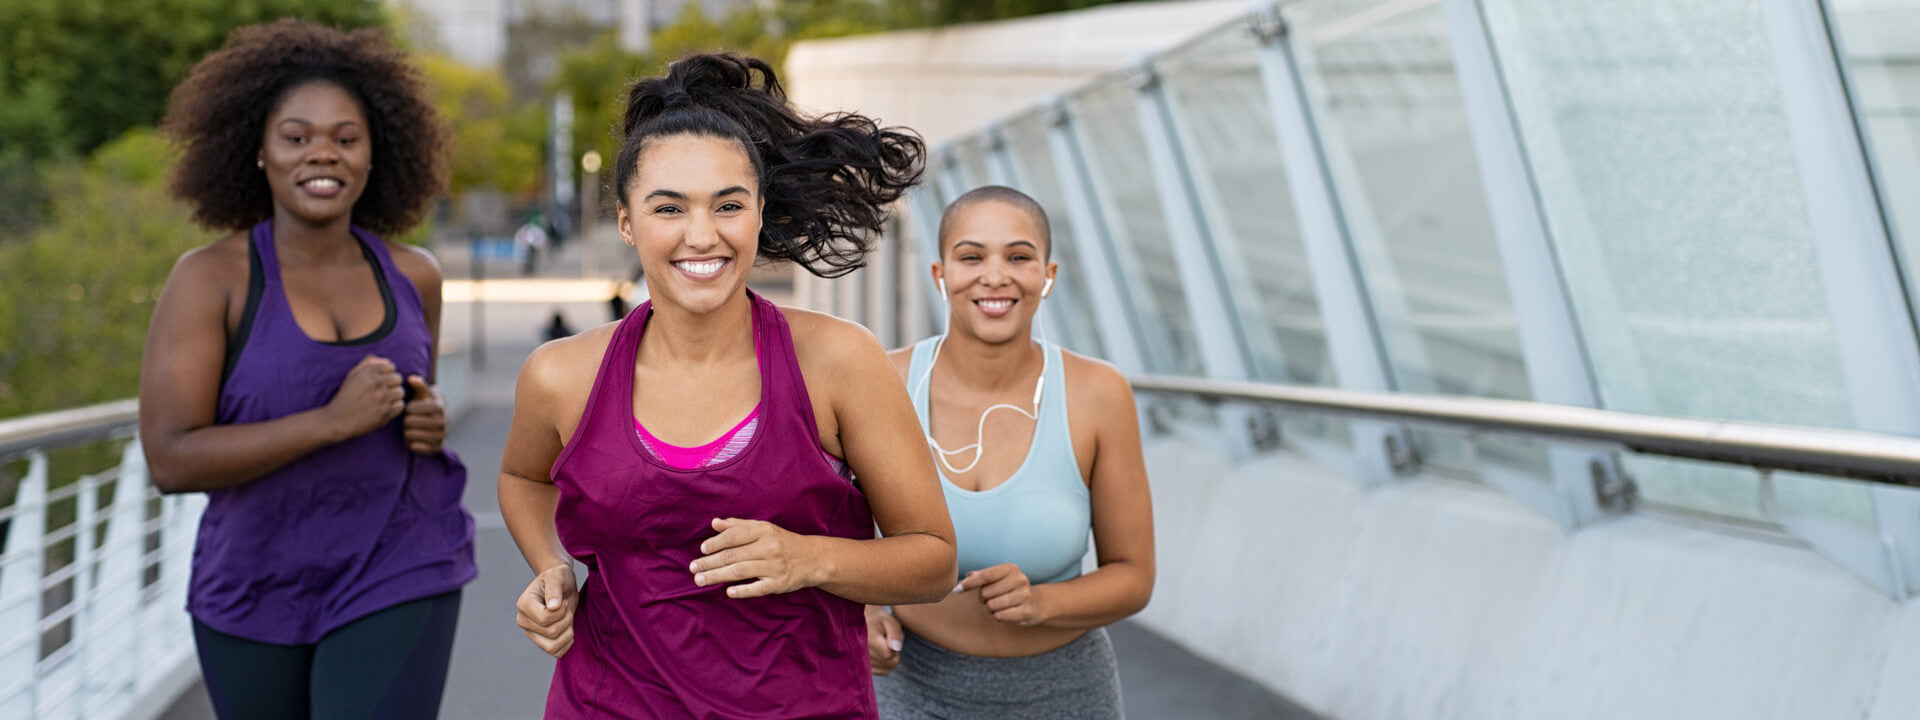 New study...exercise may boost brain health in women